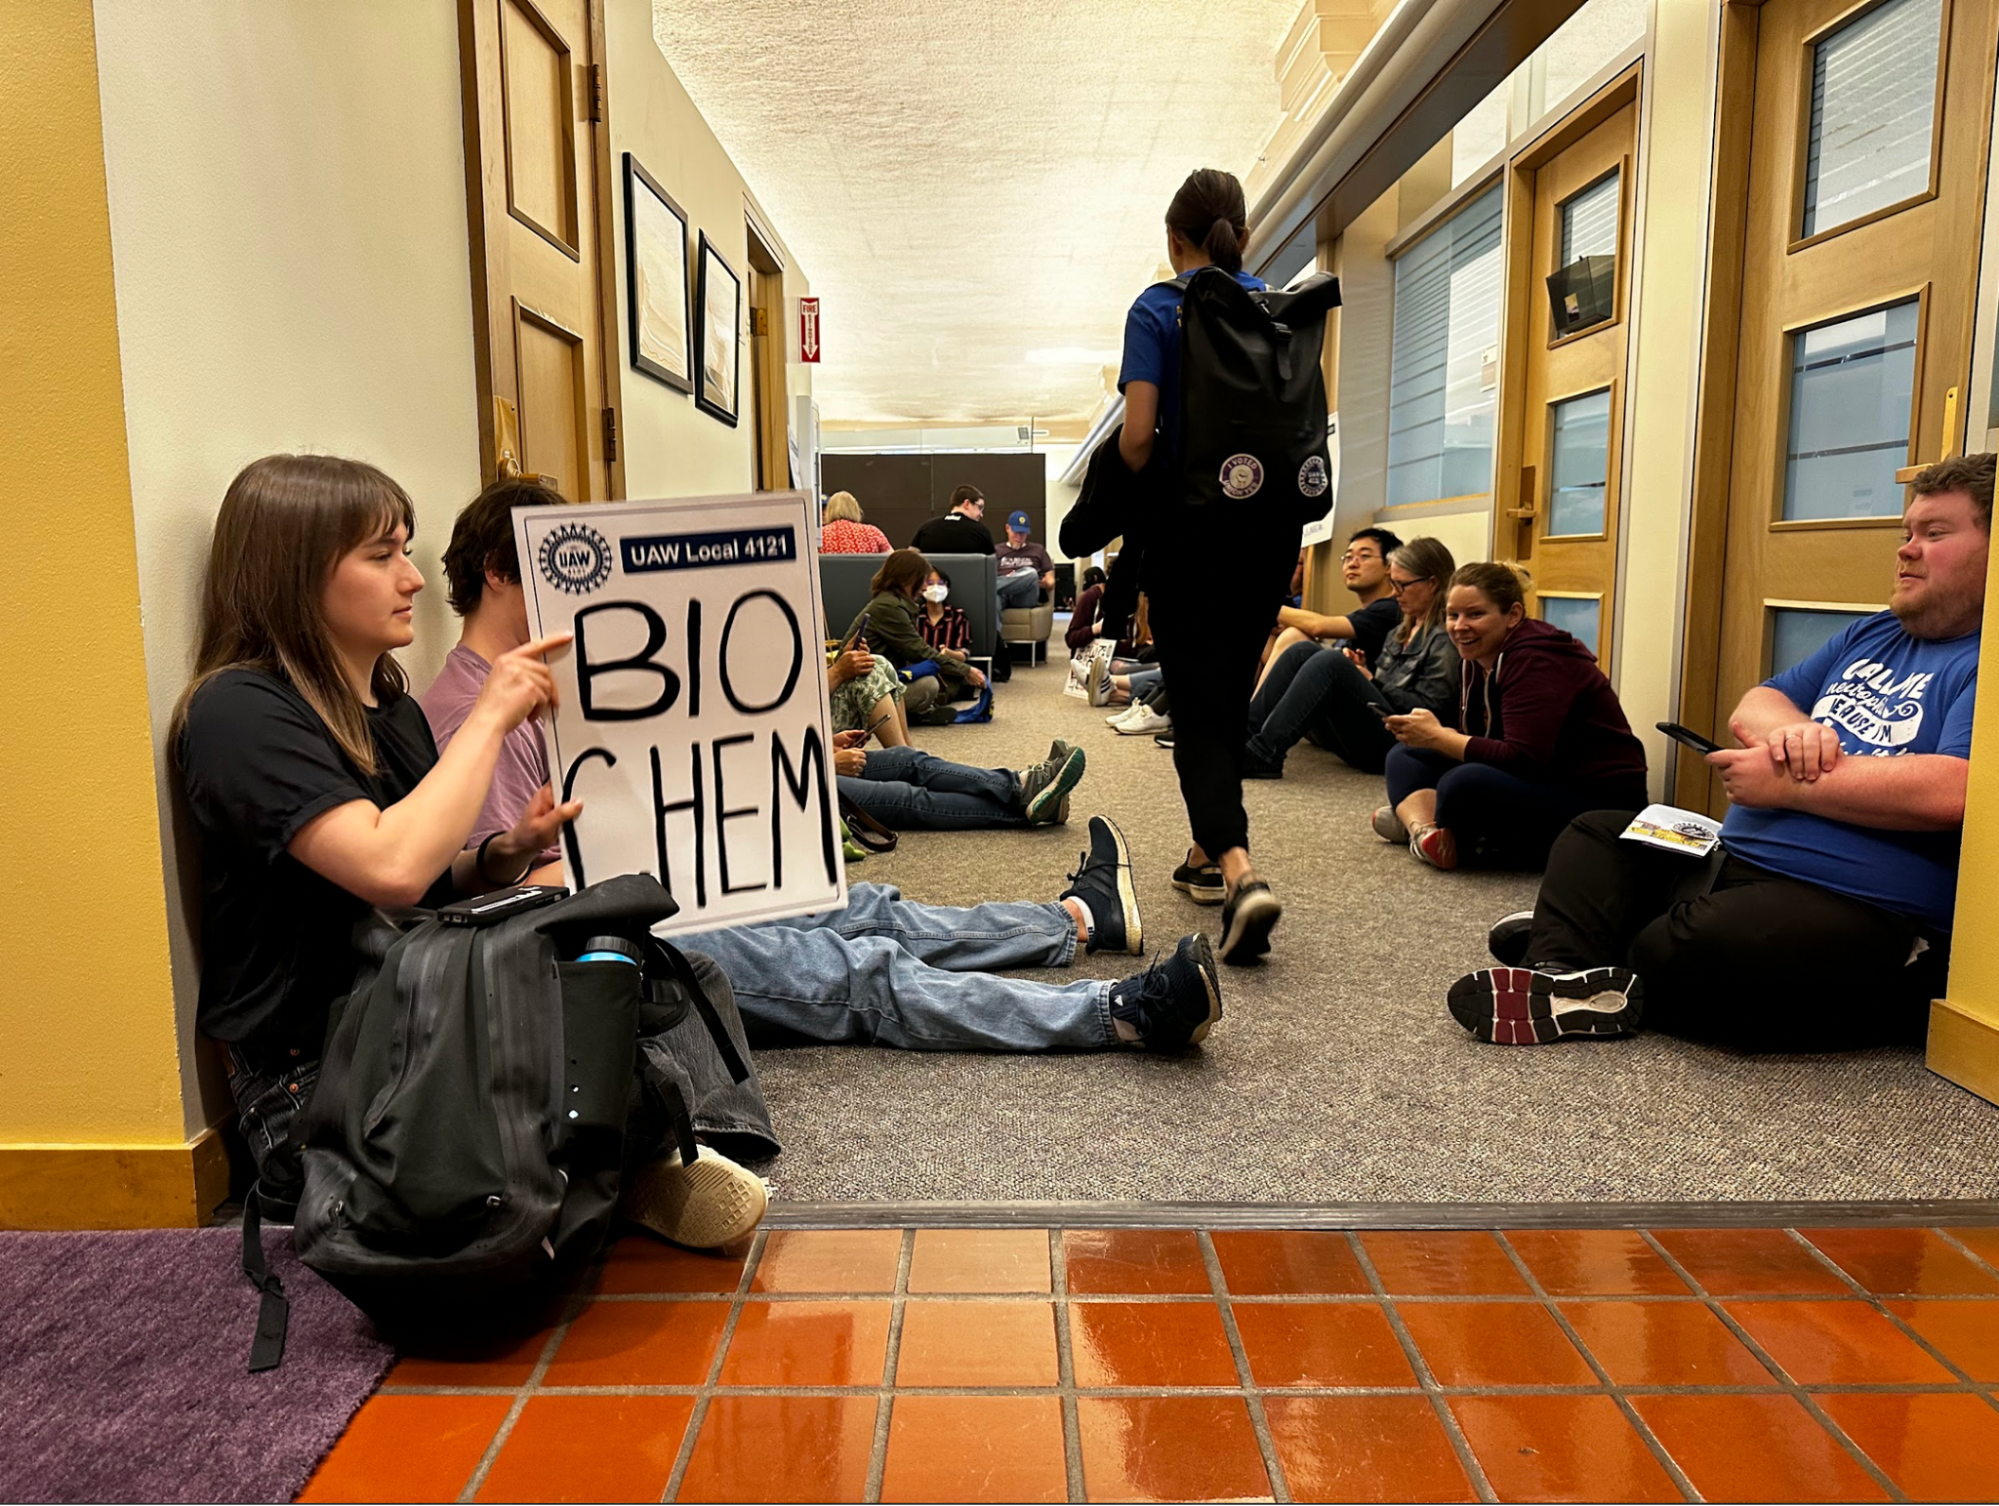 Postdocs, RSEs, and supporters sit on the floor in a hallway. One person with union stickers on their backpack is walking past the camera. Another person in the forground holds a UAW sign that reads "BIO-CHEM"